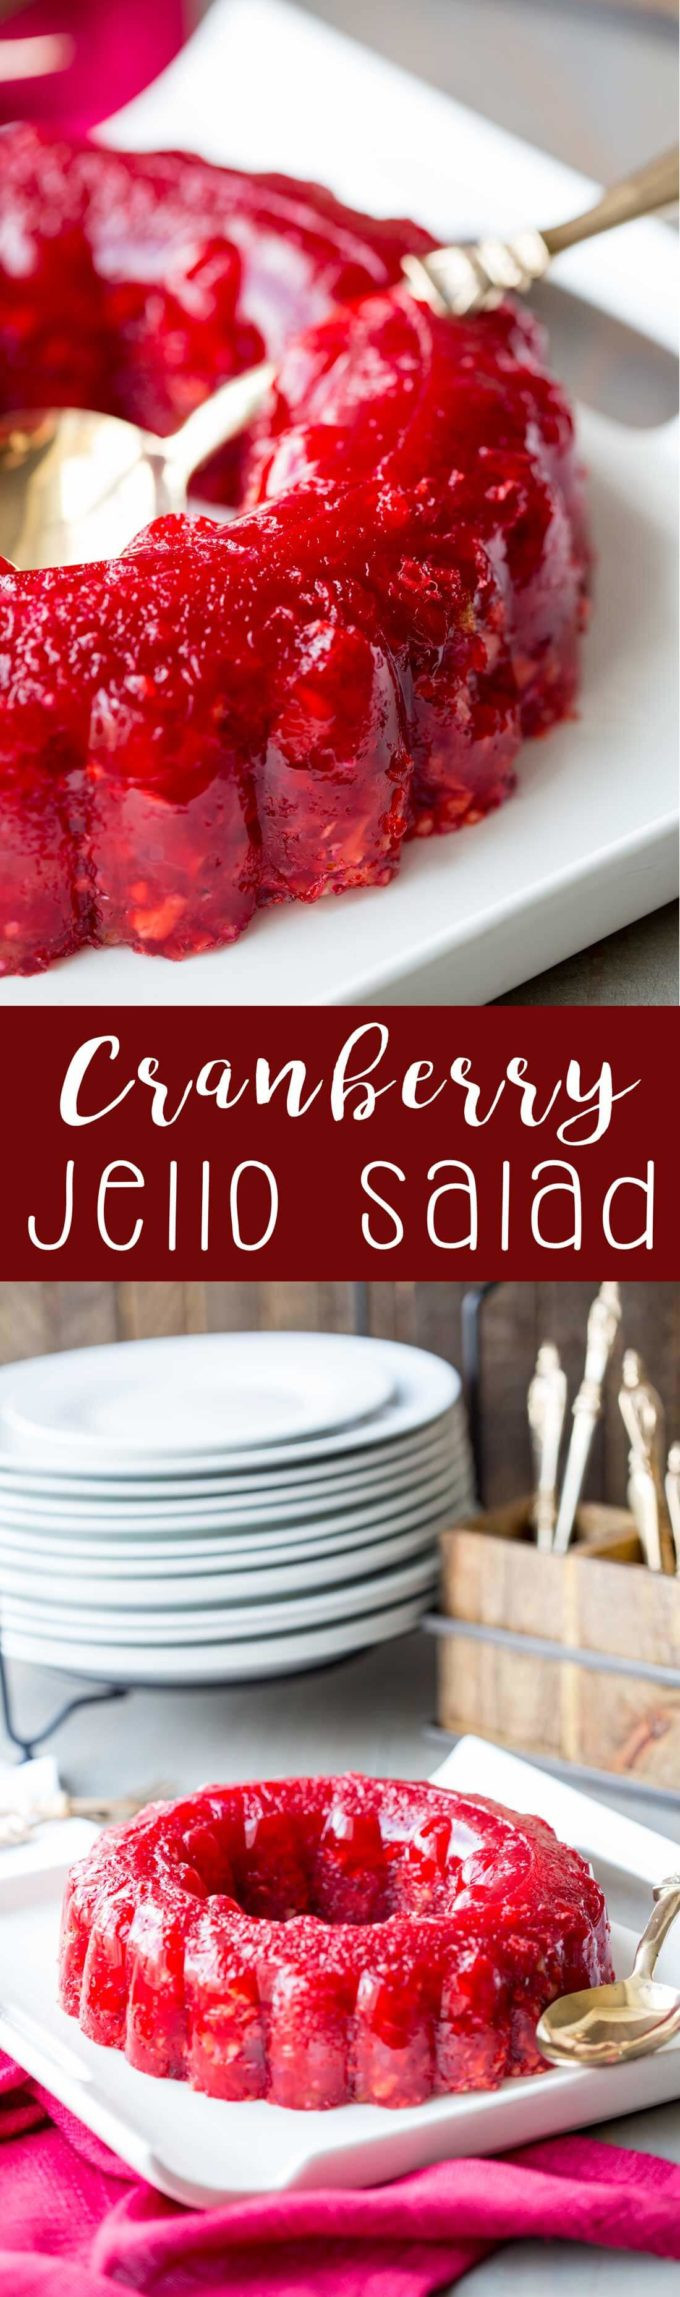 Jello Salads For Thanksgiving Dinner
 Cranberry Jello Salad Easy Peasy Meals